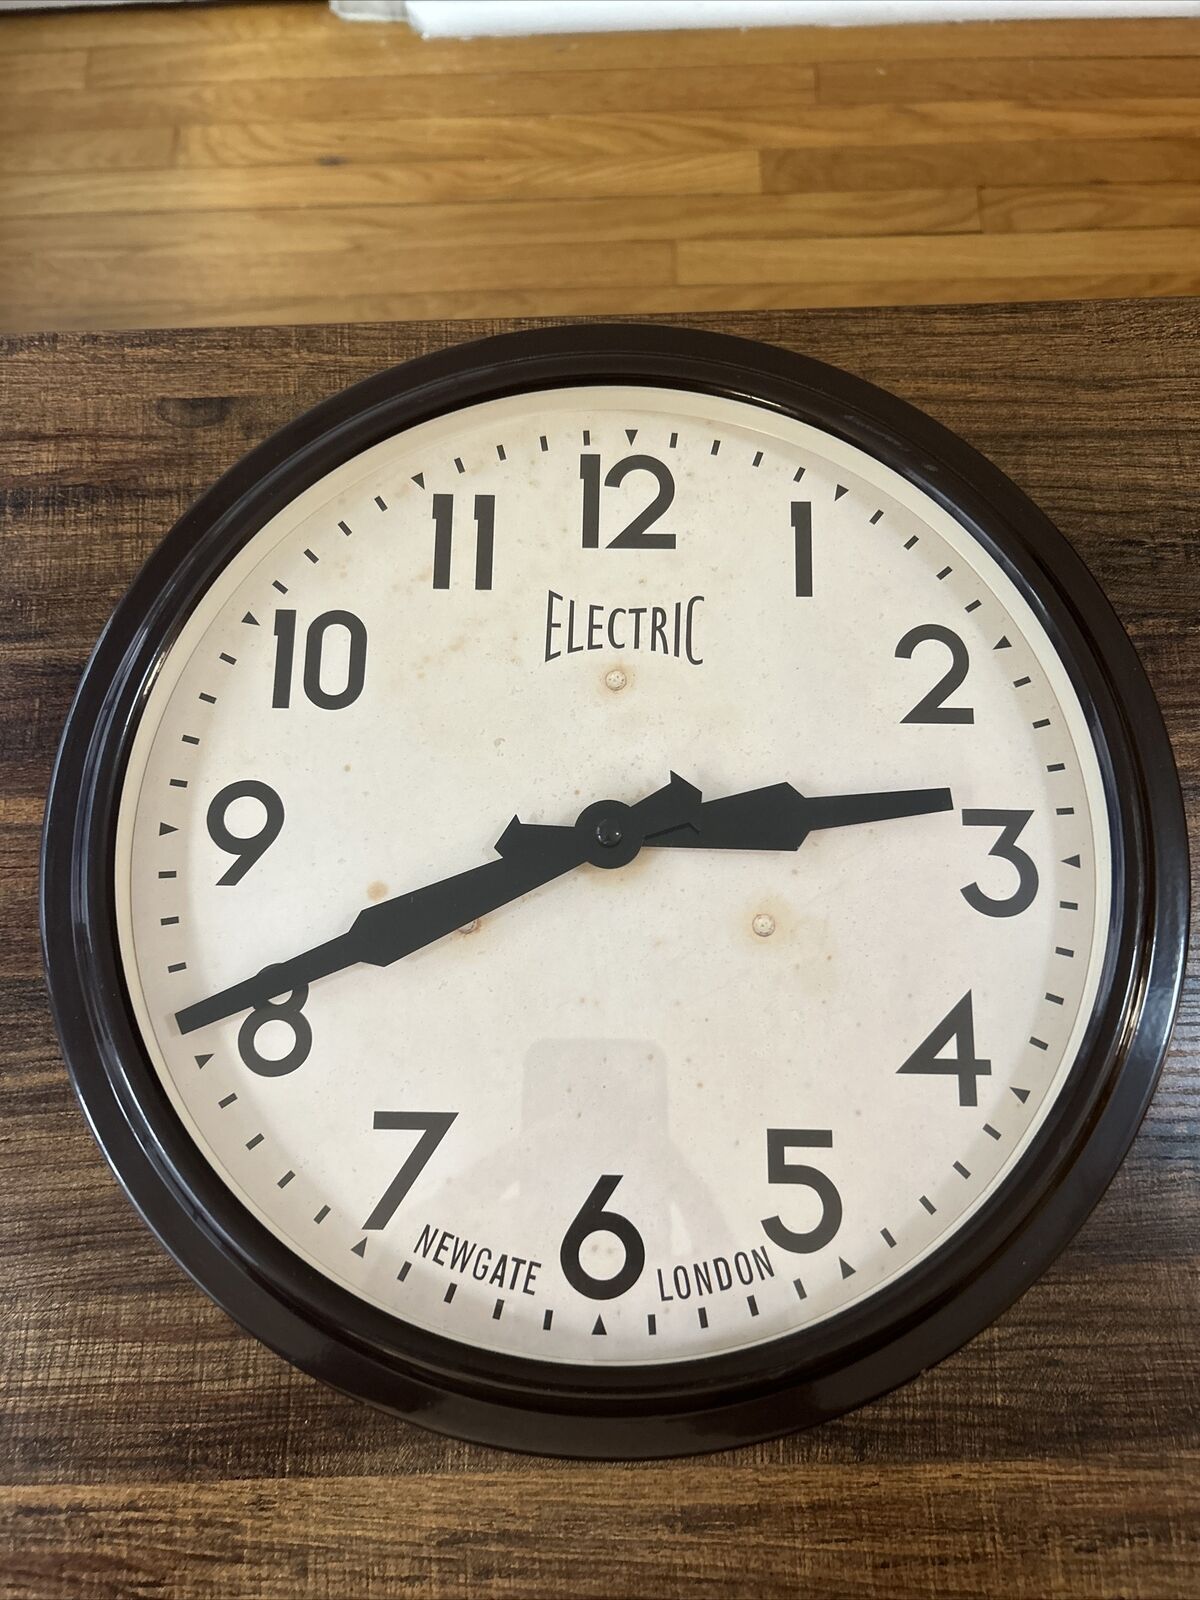 Rare Vintage Newgate London Wall Clock By Electric 13.5” Brown Tested Works